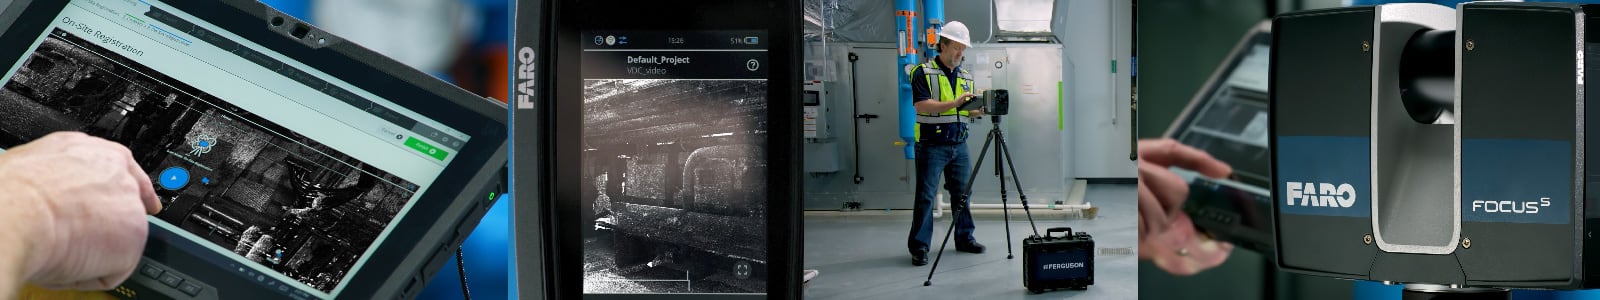 Image on left shows screen of a Faro 3D scanner, and image on right shows a Ferguson associate wearing a hard hat and reflective vest holding the scanner in an industrial room.